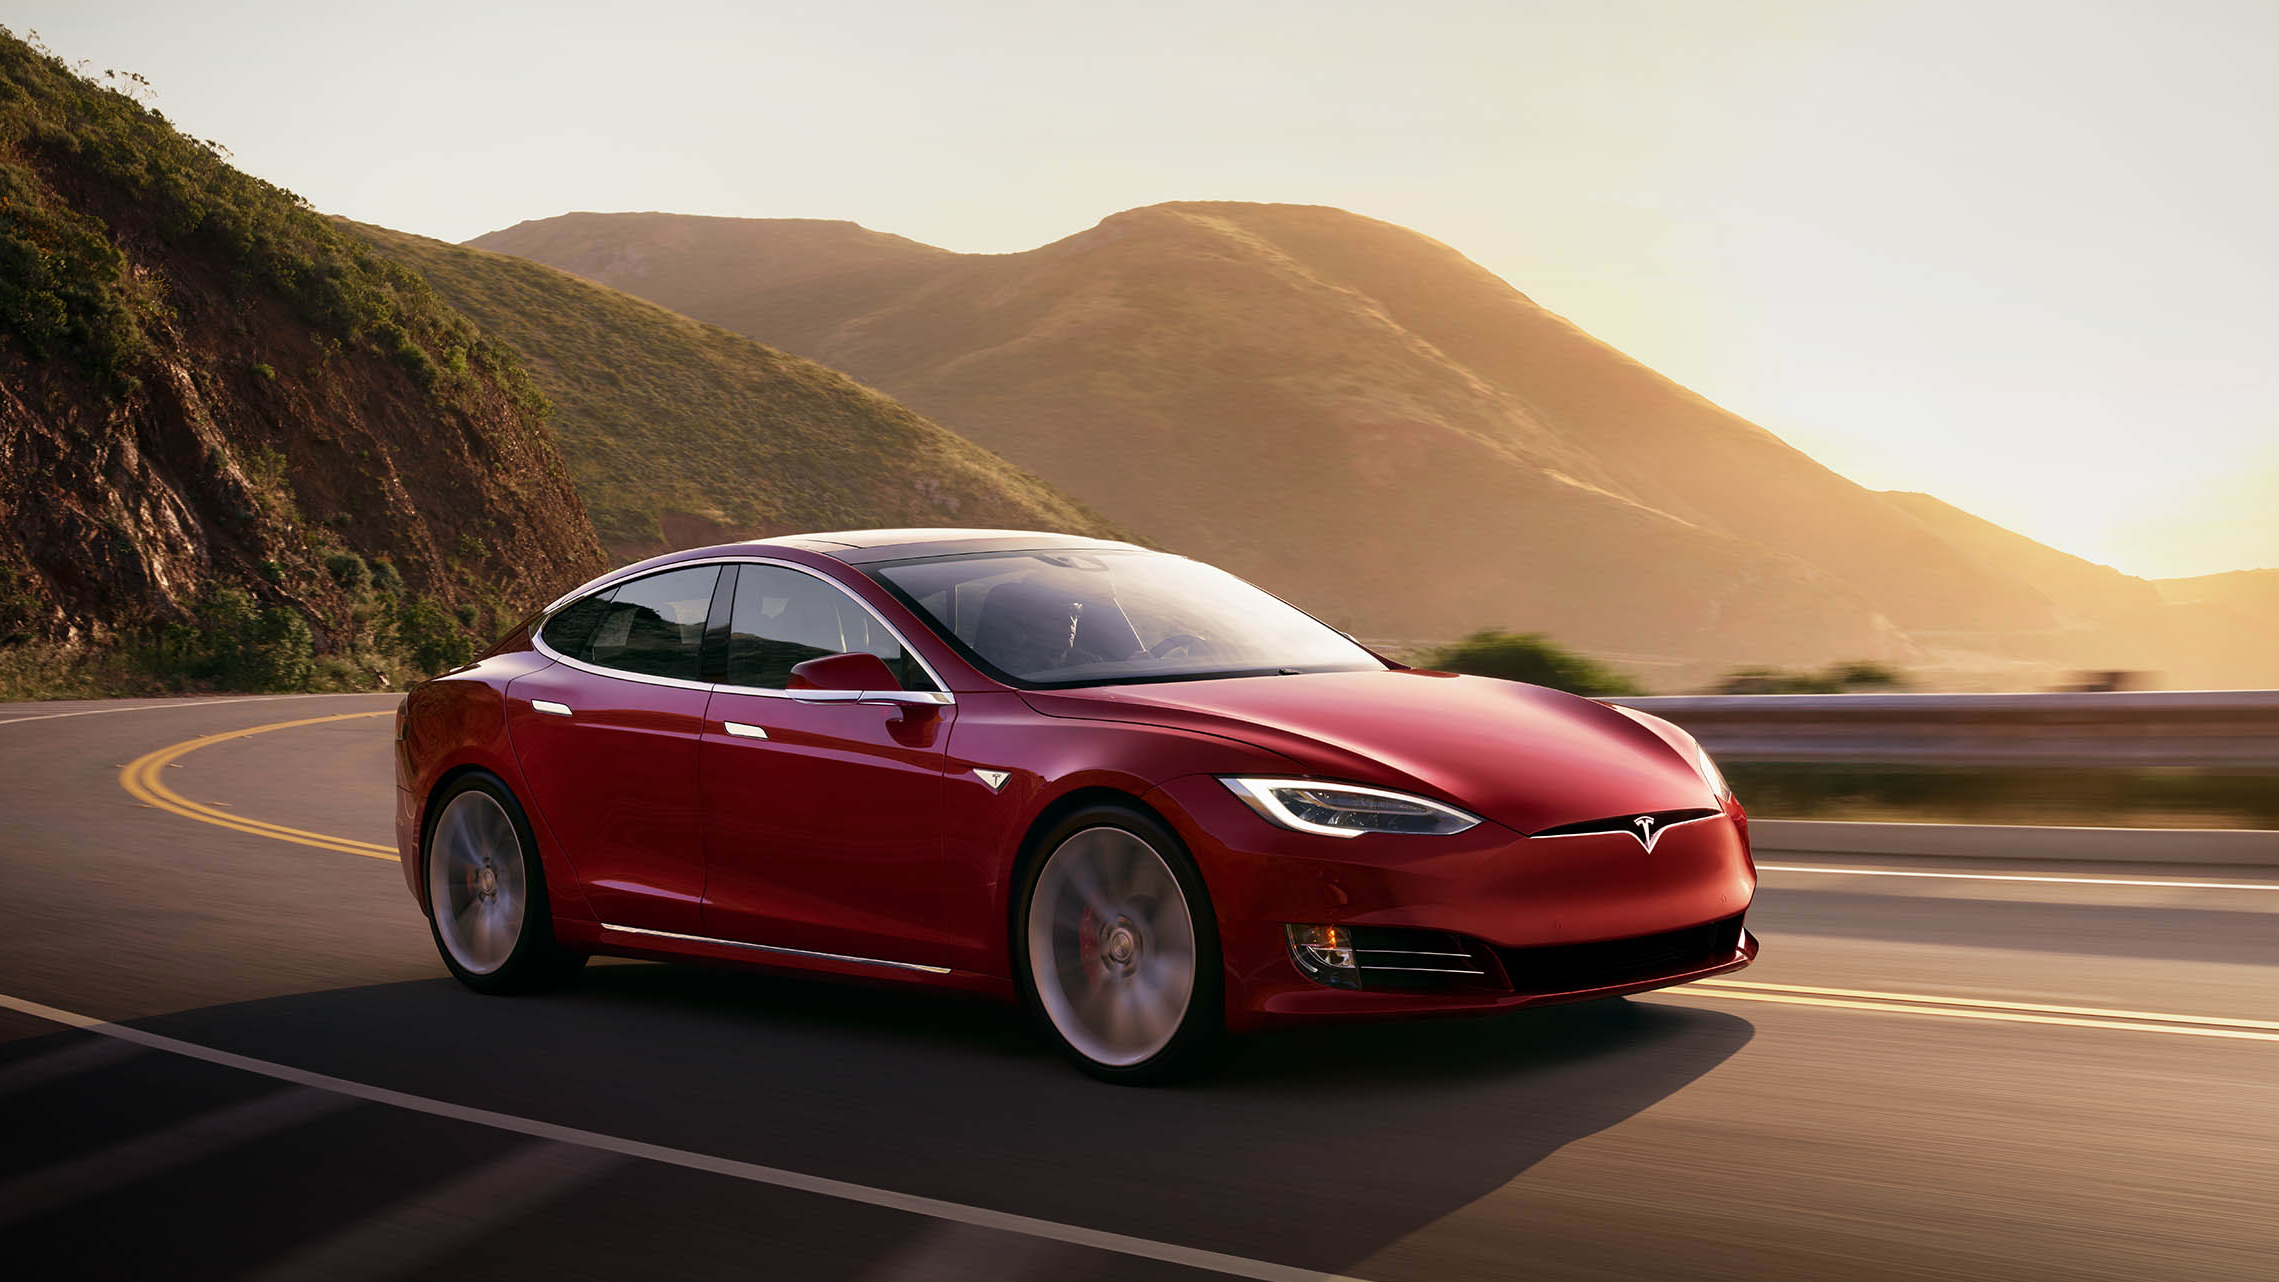 Hackers can trick a Tesla into accelerating by 50 miles per hour